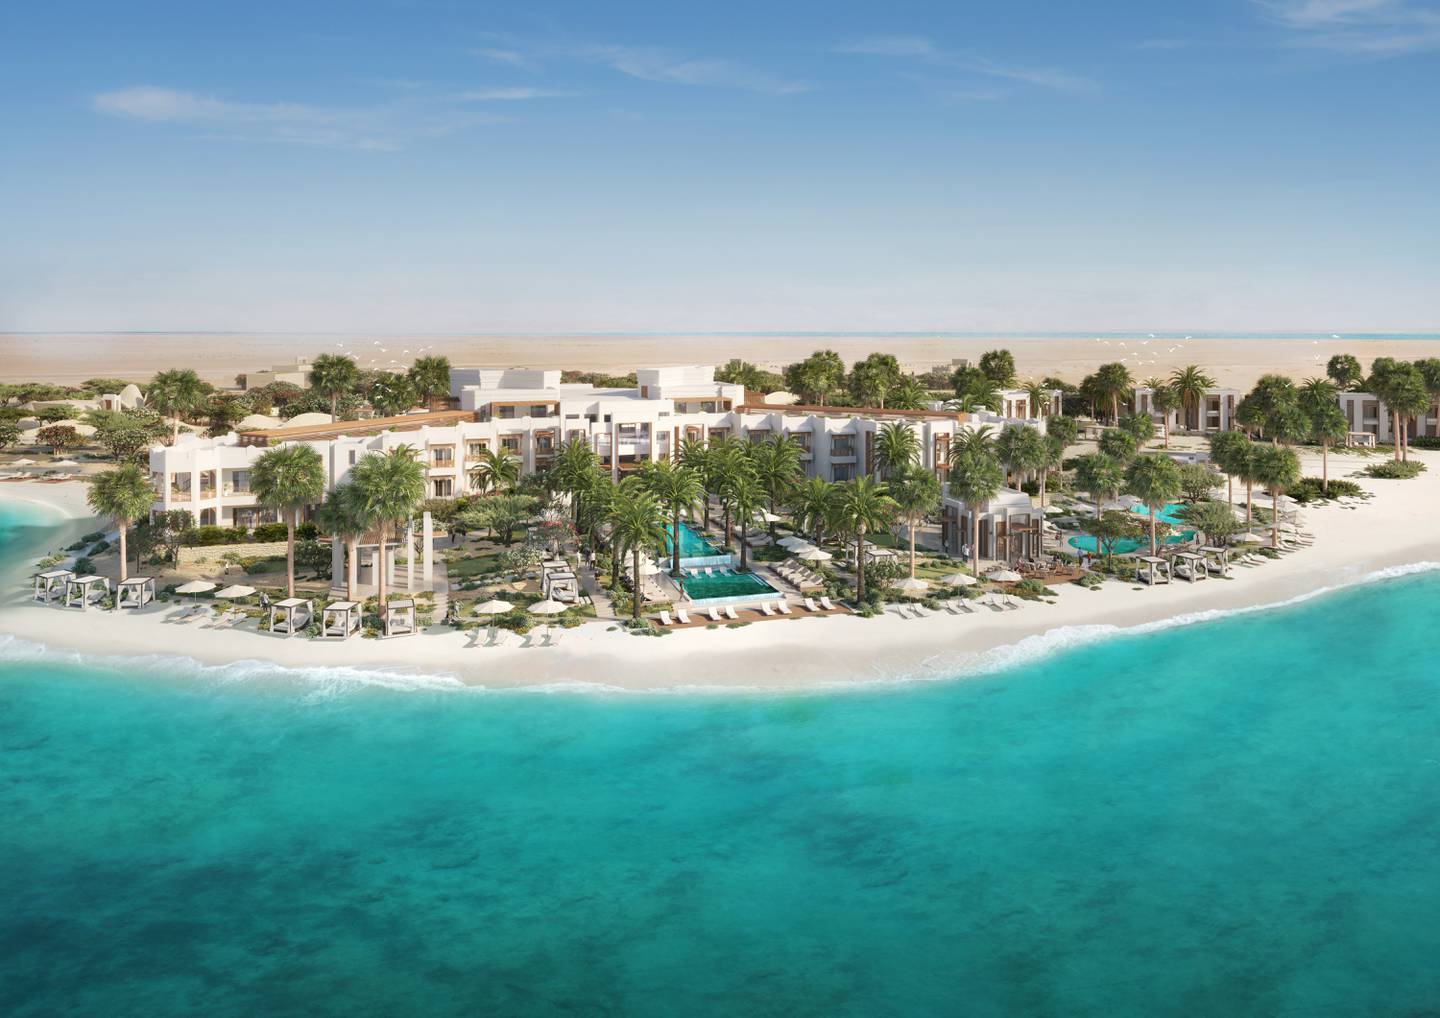 Mantis Bahrain Hawar Island will open in 2024, and is the first Mantis property in the Middle East. Courtesy Accor